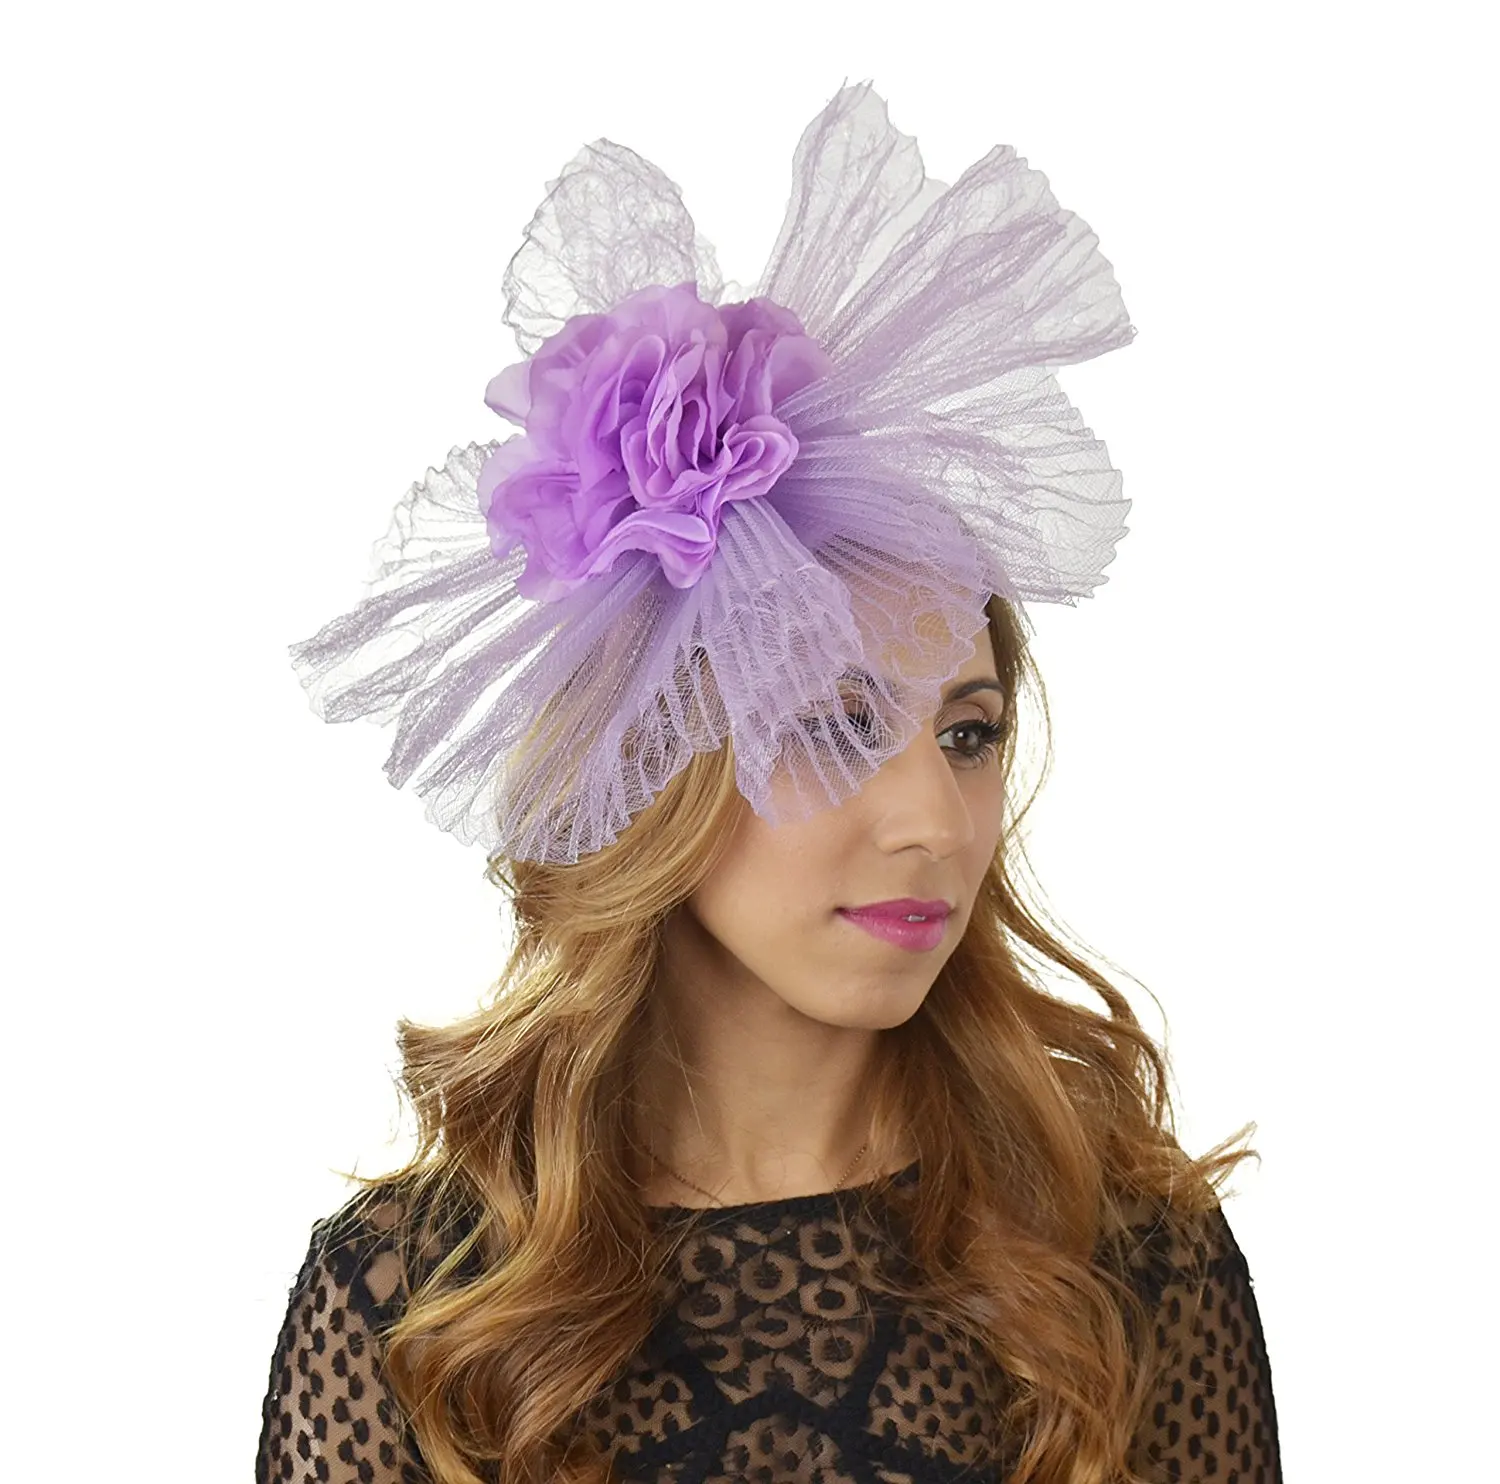 Cheap Lilac Wedding Hats Find Lilac Wedding Hats Deals On Line At